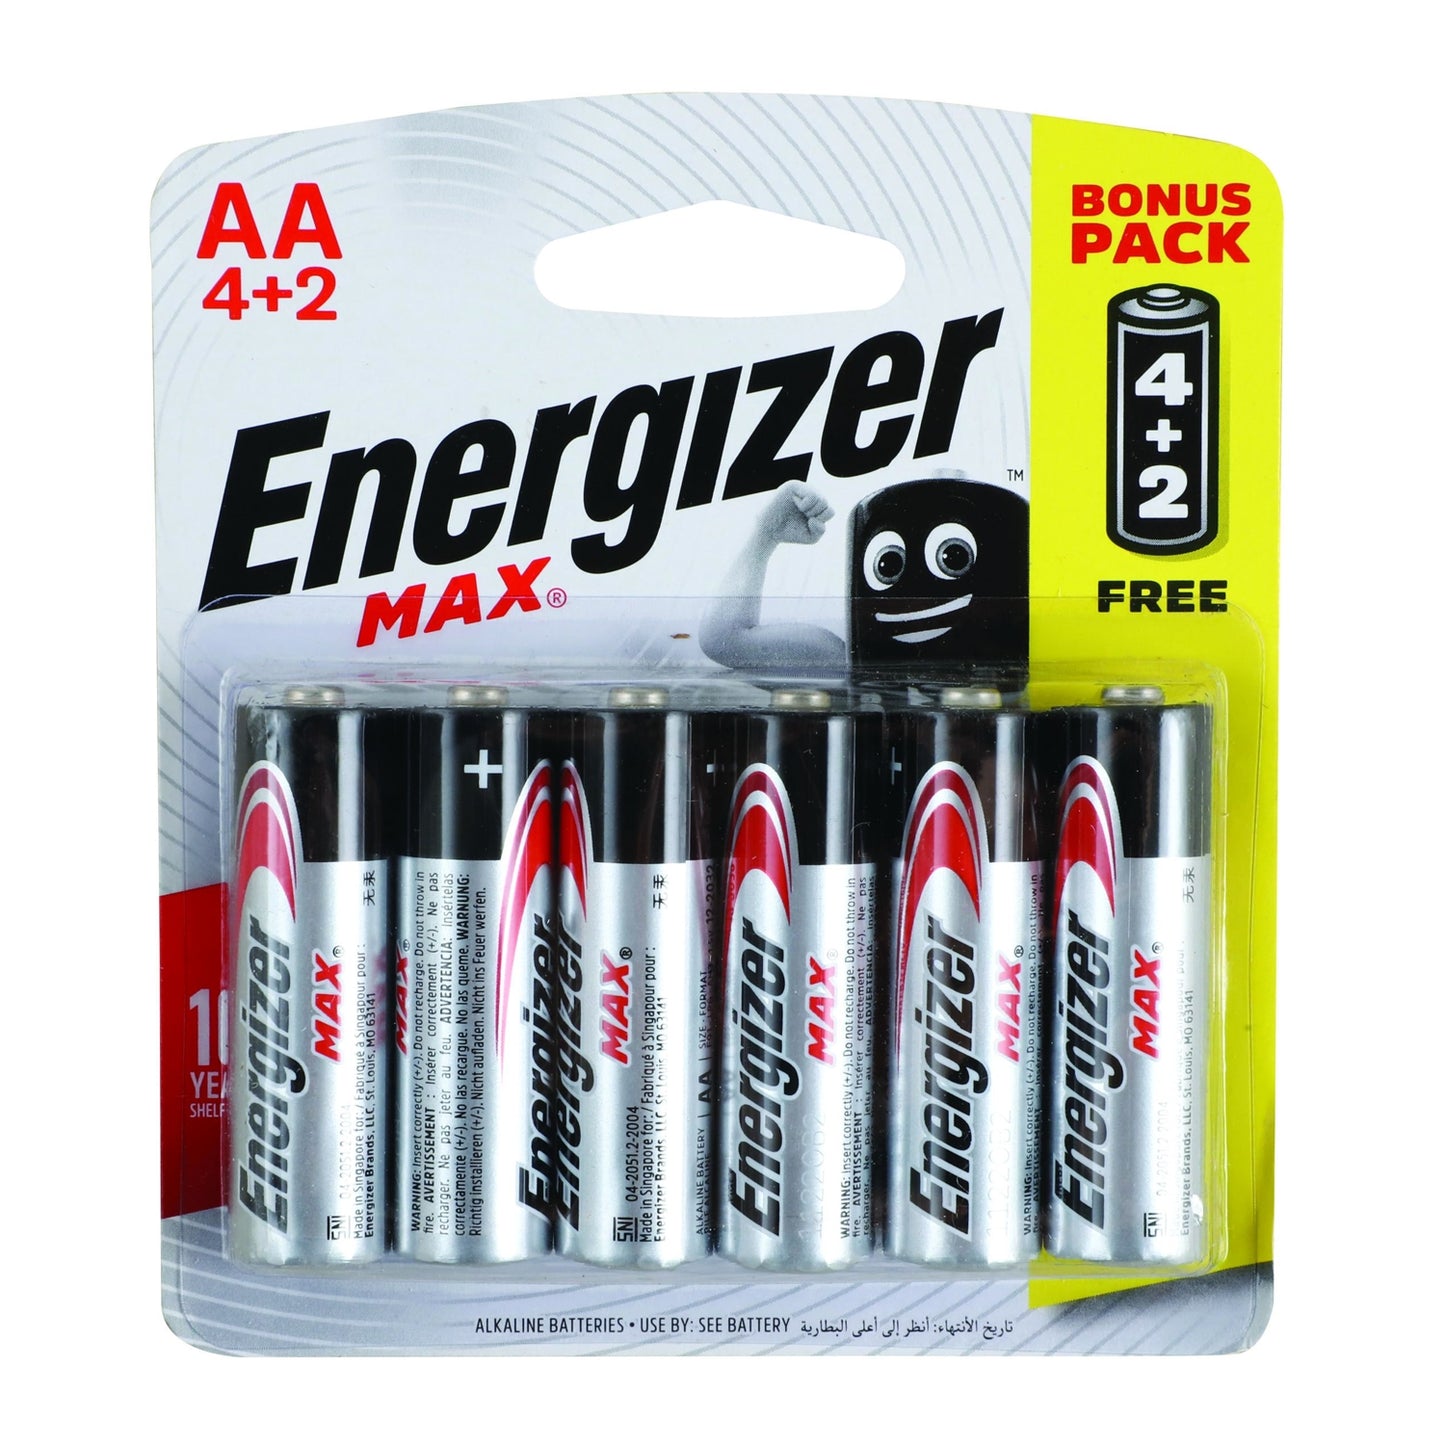 Energizer max aa - 6 pack  4+2 free